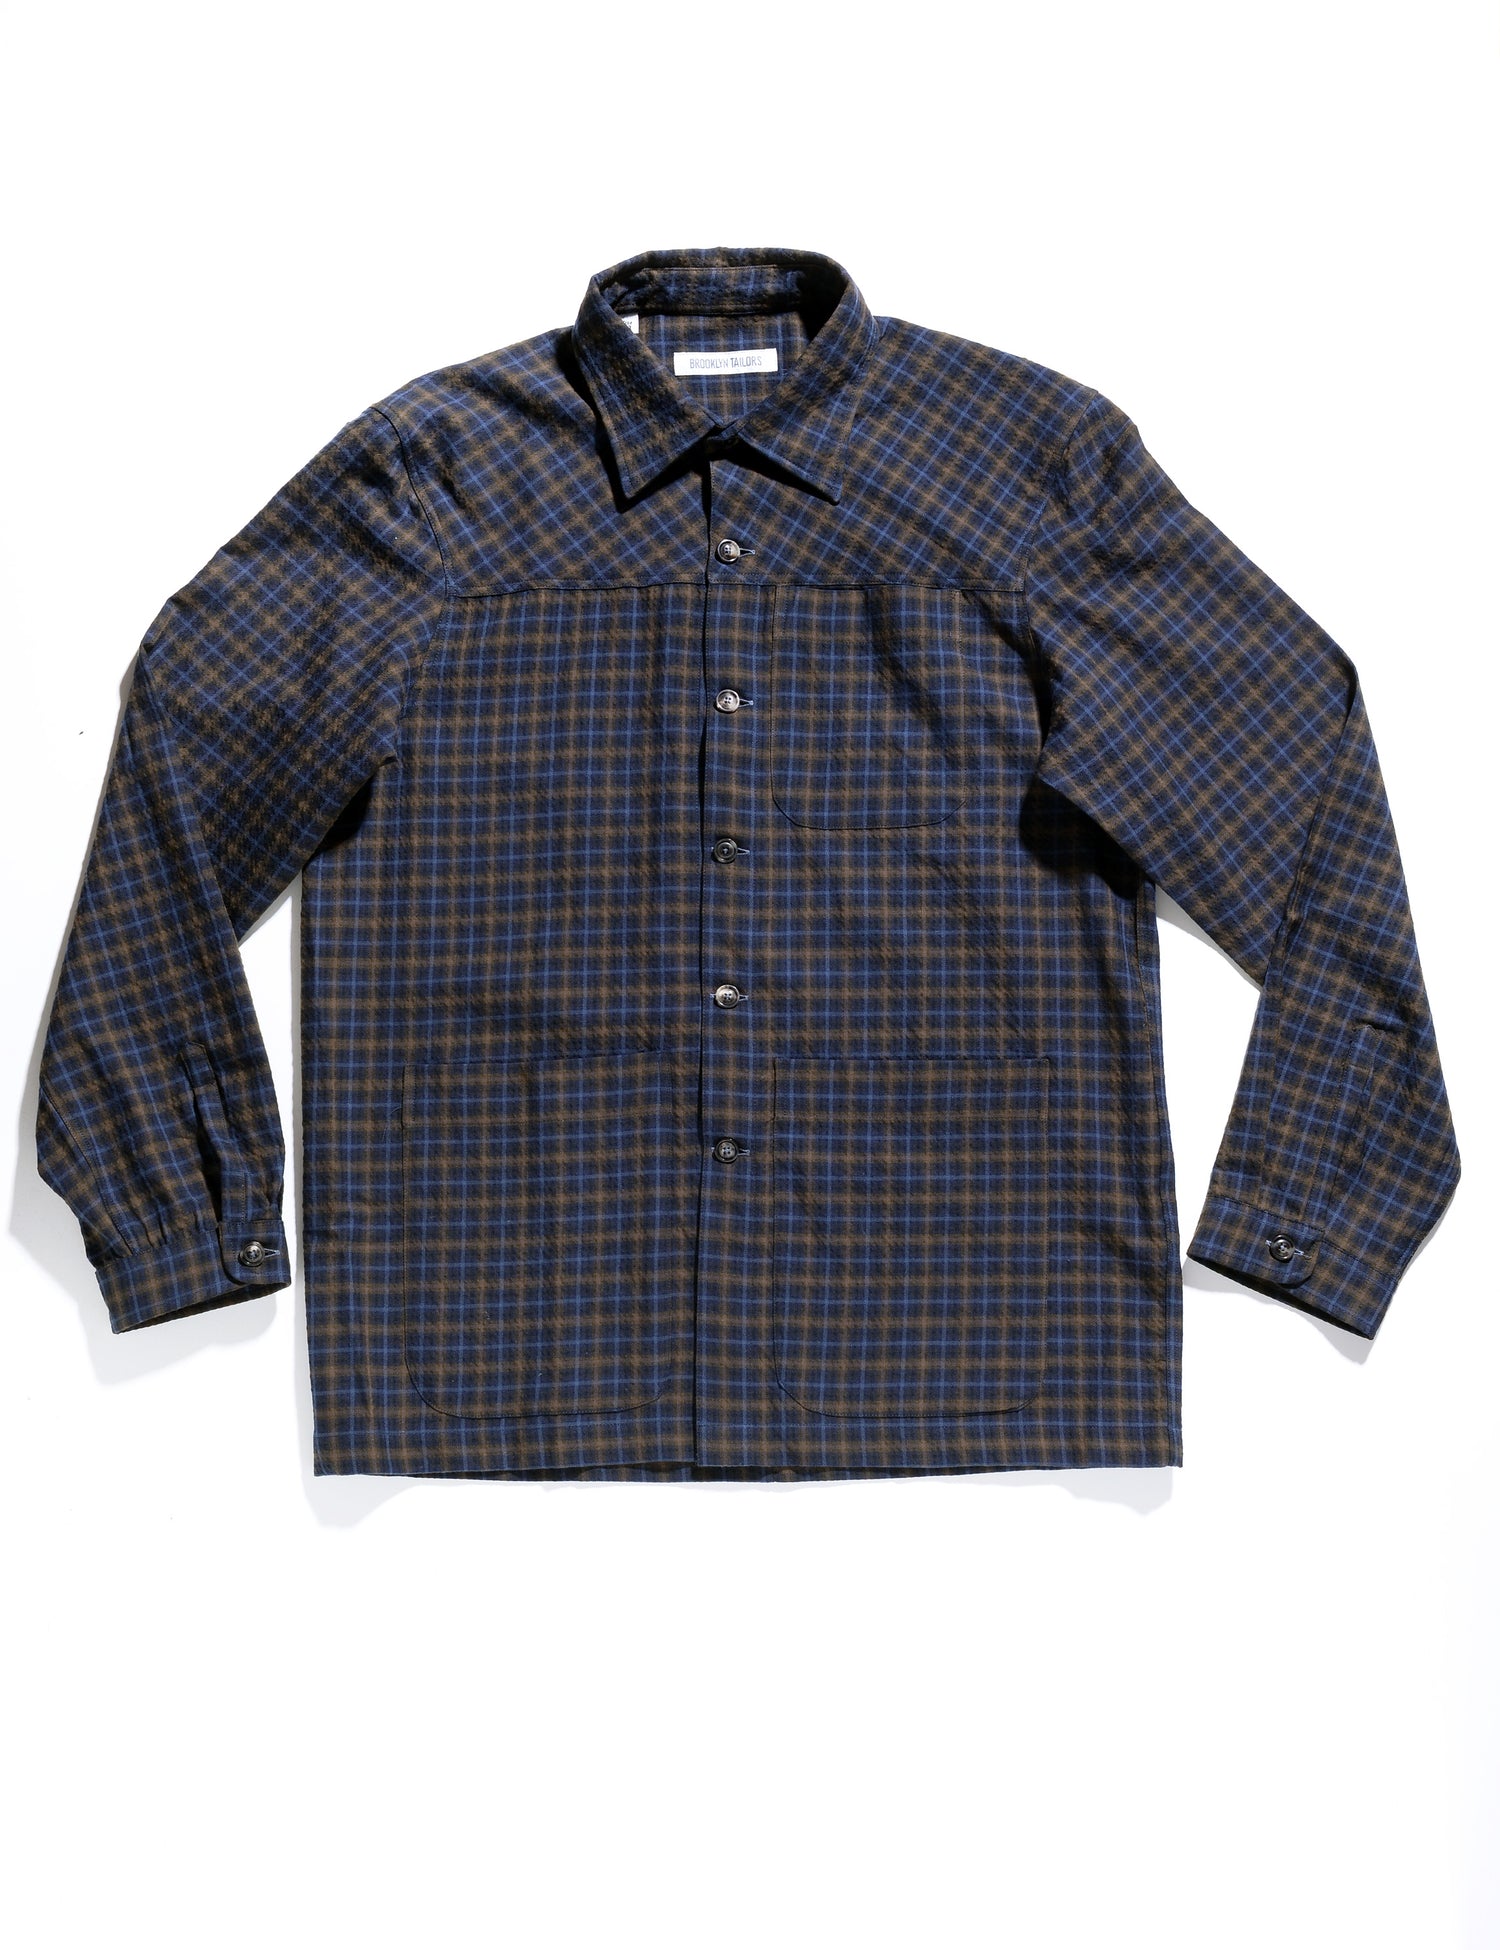 Full length flat shot of Brooklyn Tailors BKT15 Shirt Jacket in Crinkled Wool & Cotton - Autumn Check